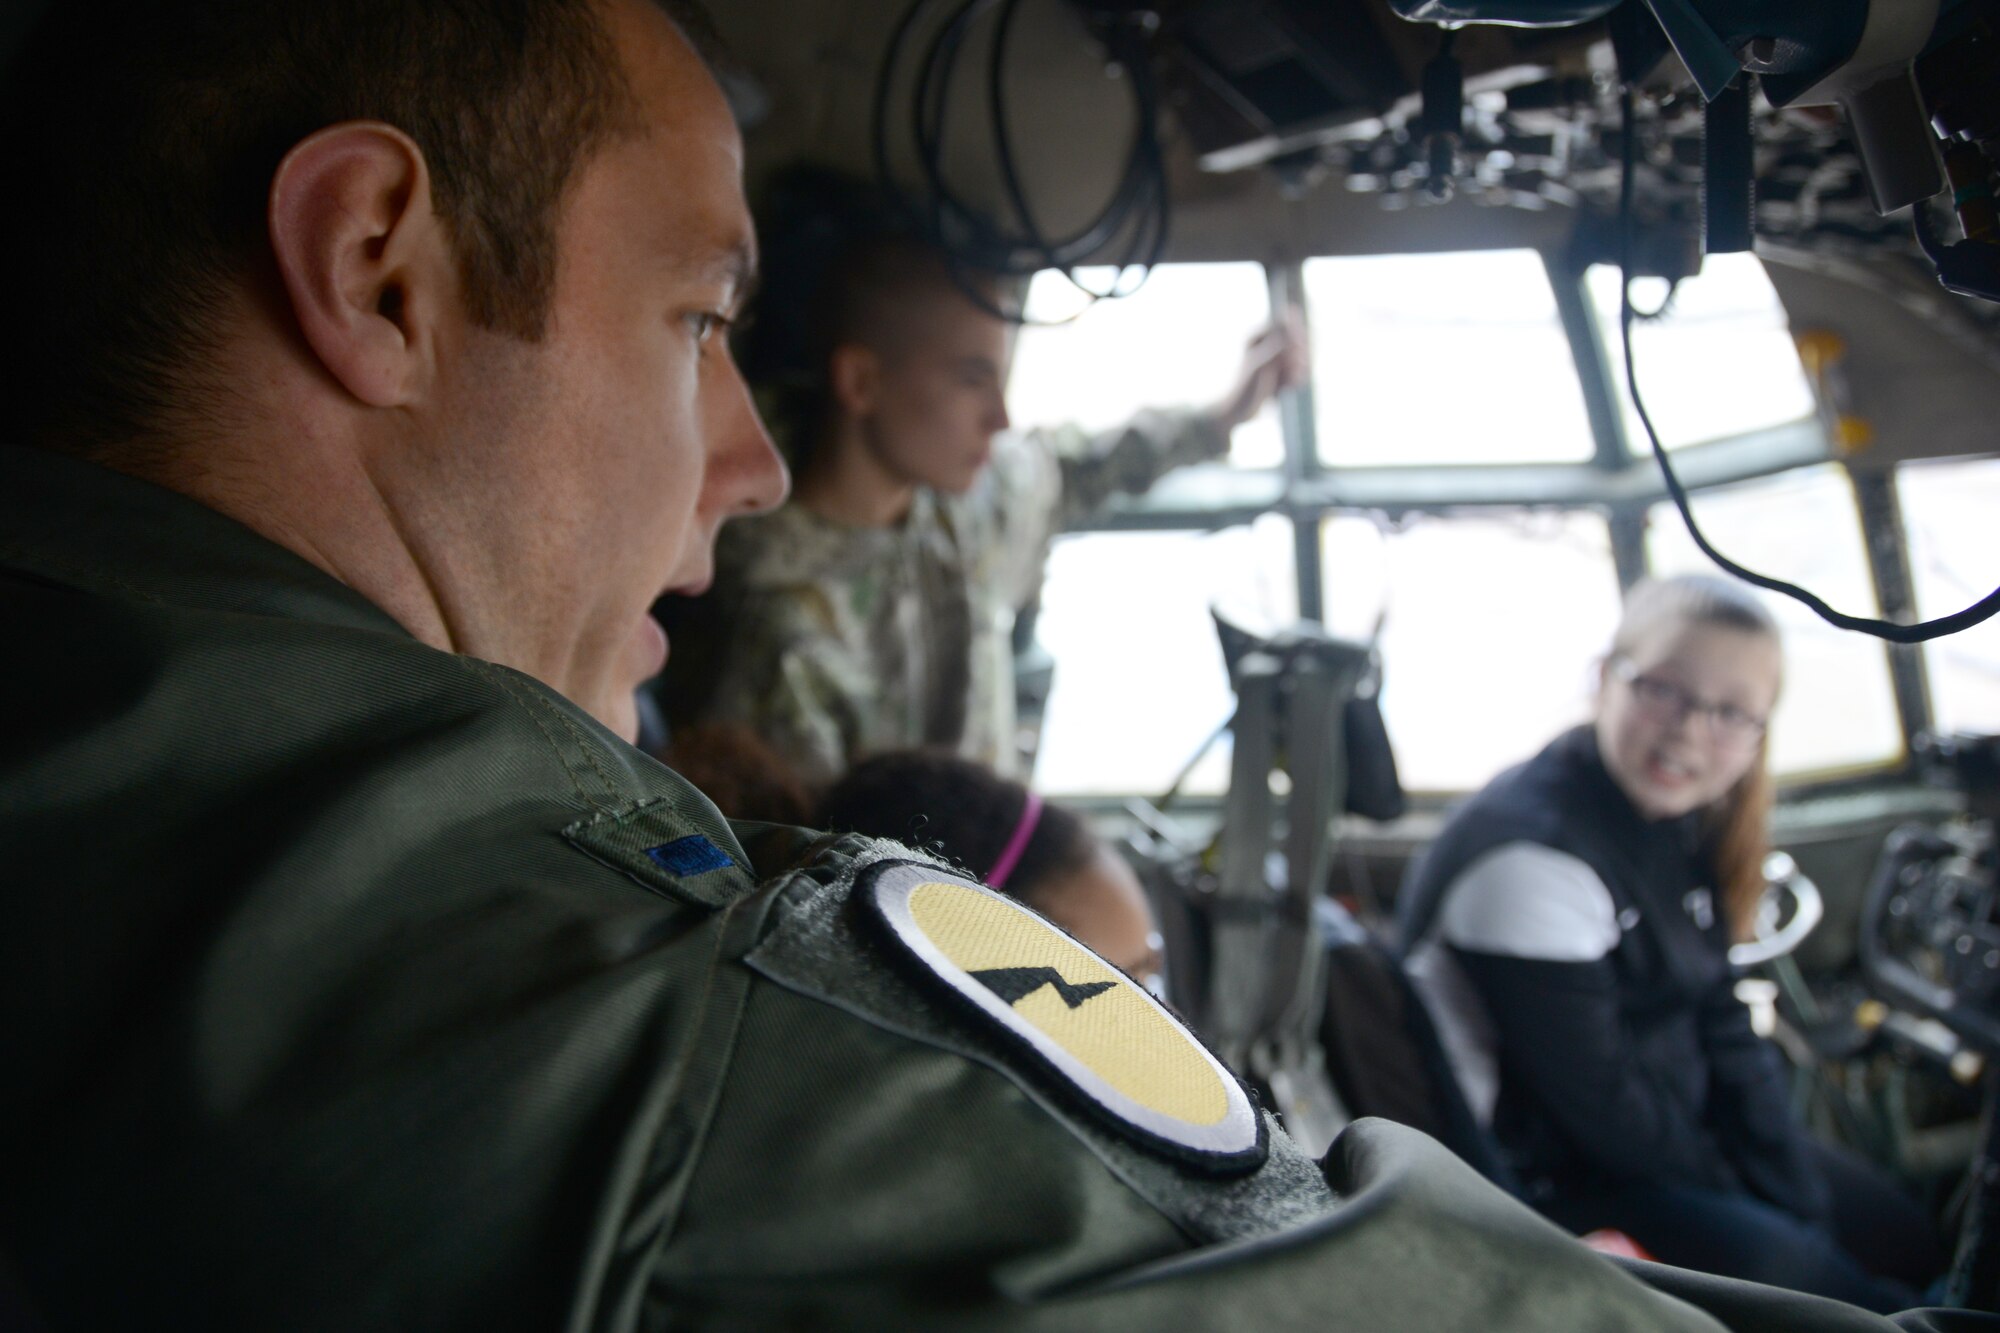 1st Lt. Paul Bolduc, C-130H pilot with the 118th Airlift Squadron, points out and explains the small emergency exit window, among other things, located in the cockpit of a C-130H to a group of Connecticut Air Guard youth at Bradley Air National Guard Base, East Granby, on April 5, 2014. In the background two of the youth participants, Cody Kirkland, 16, and Tori Pilletere, 12, ask questions and get a feel for what it’s like to be a pilot as a Flying Yankee. (U.S. Air National Guard photo by Tech. Sgt. Joshua Mead)